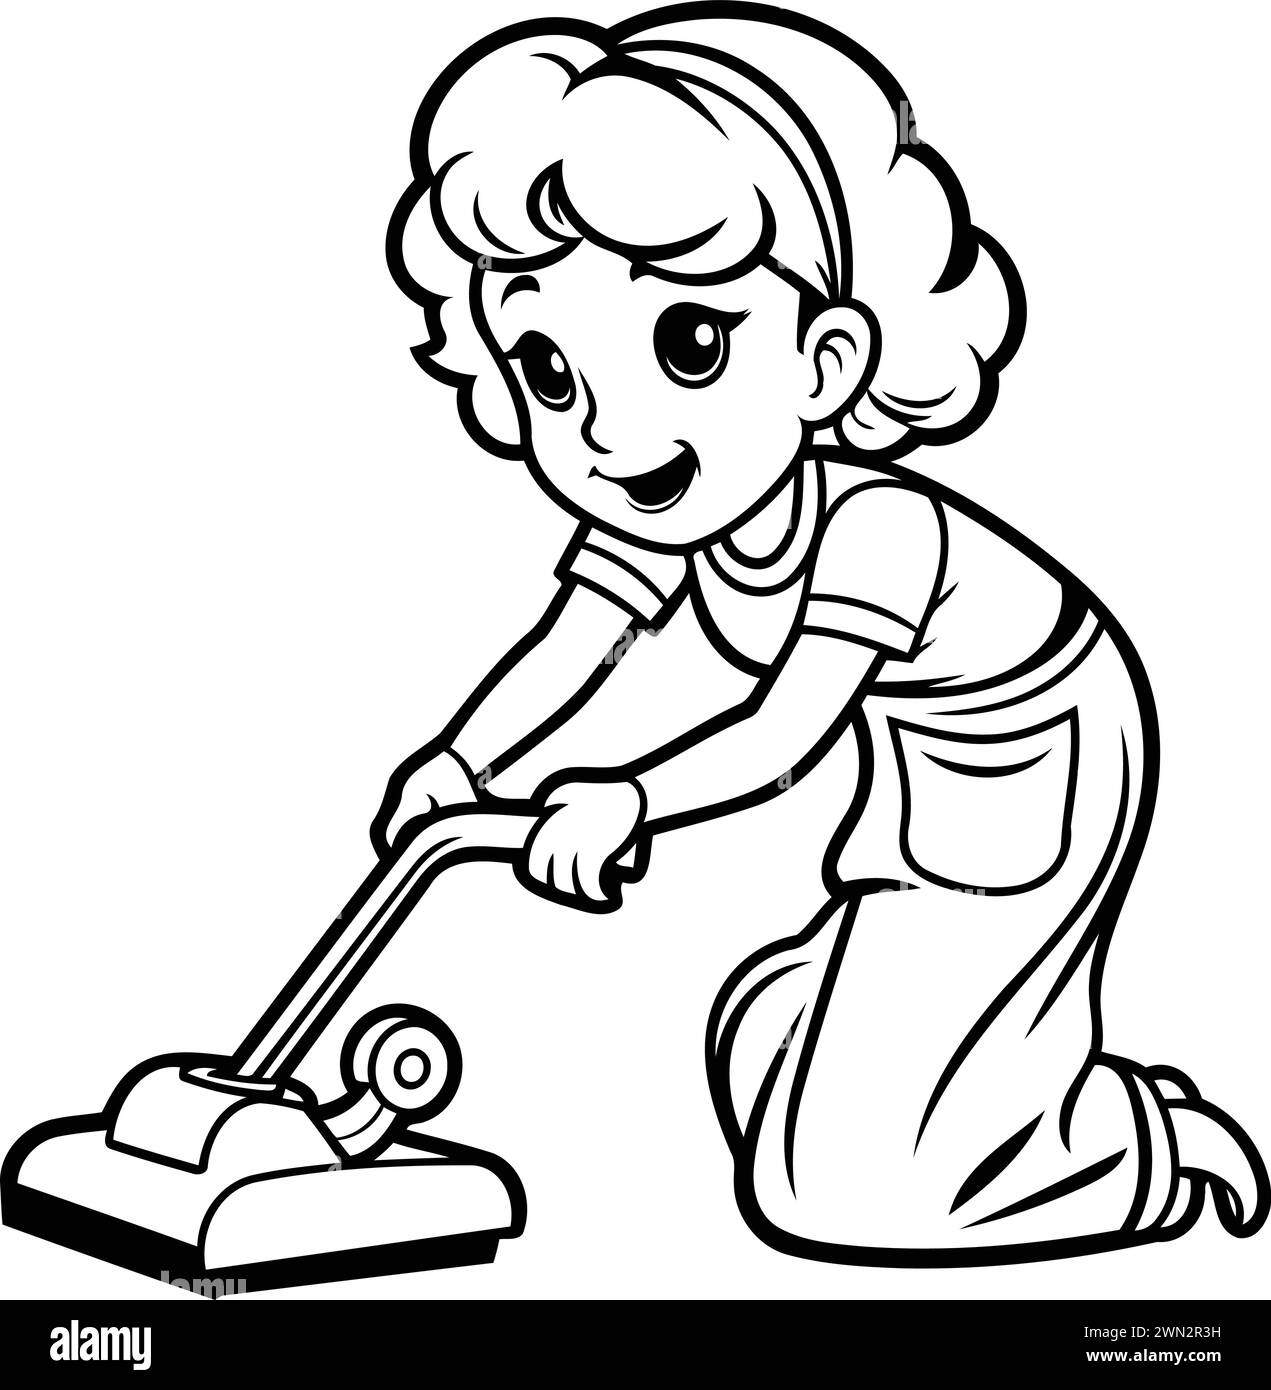 Illustration of a Kid Boy Using a Vacuum Cleaner. Coloring Book Stock ...